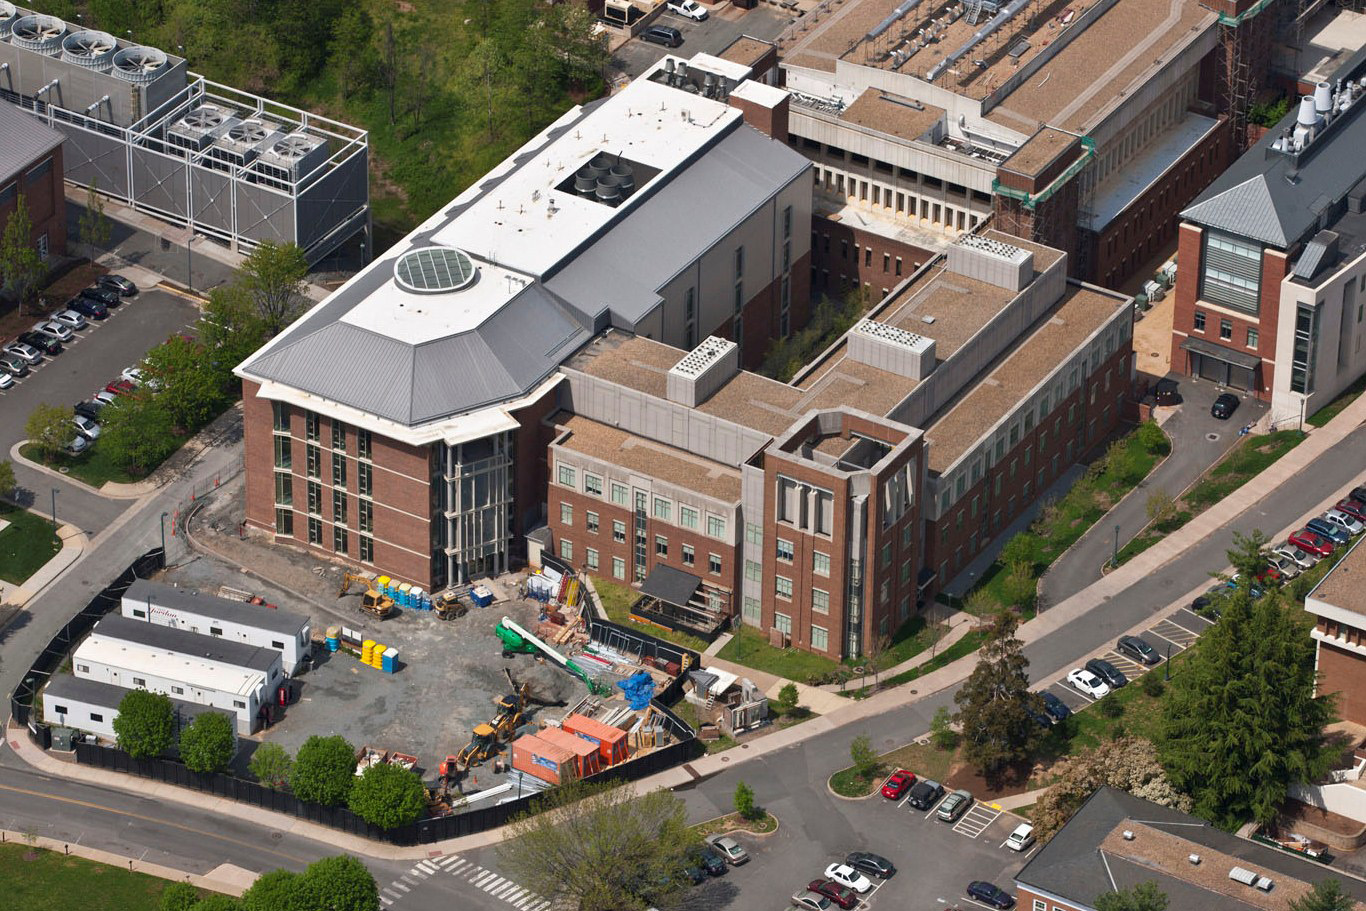 Aerial view of the brick multistory Physical and Life Sciences Research building